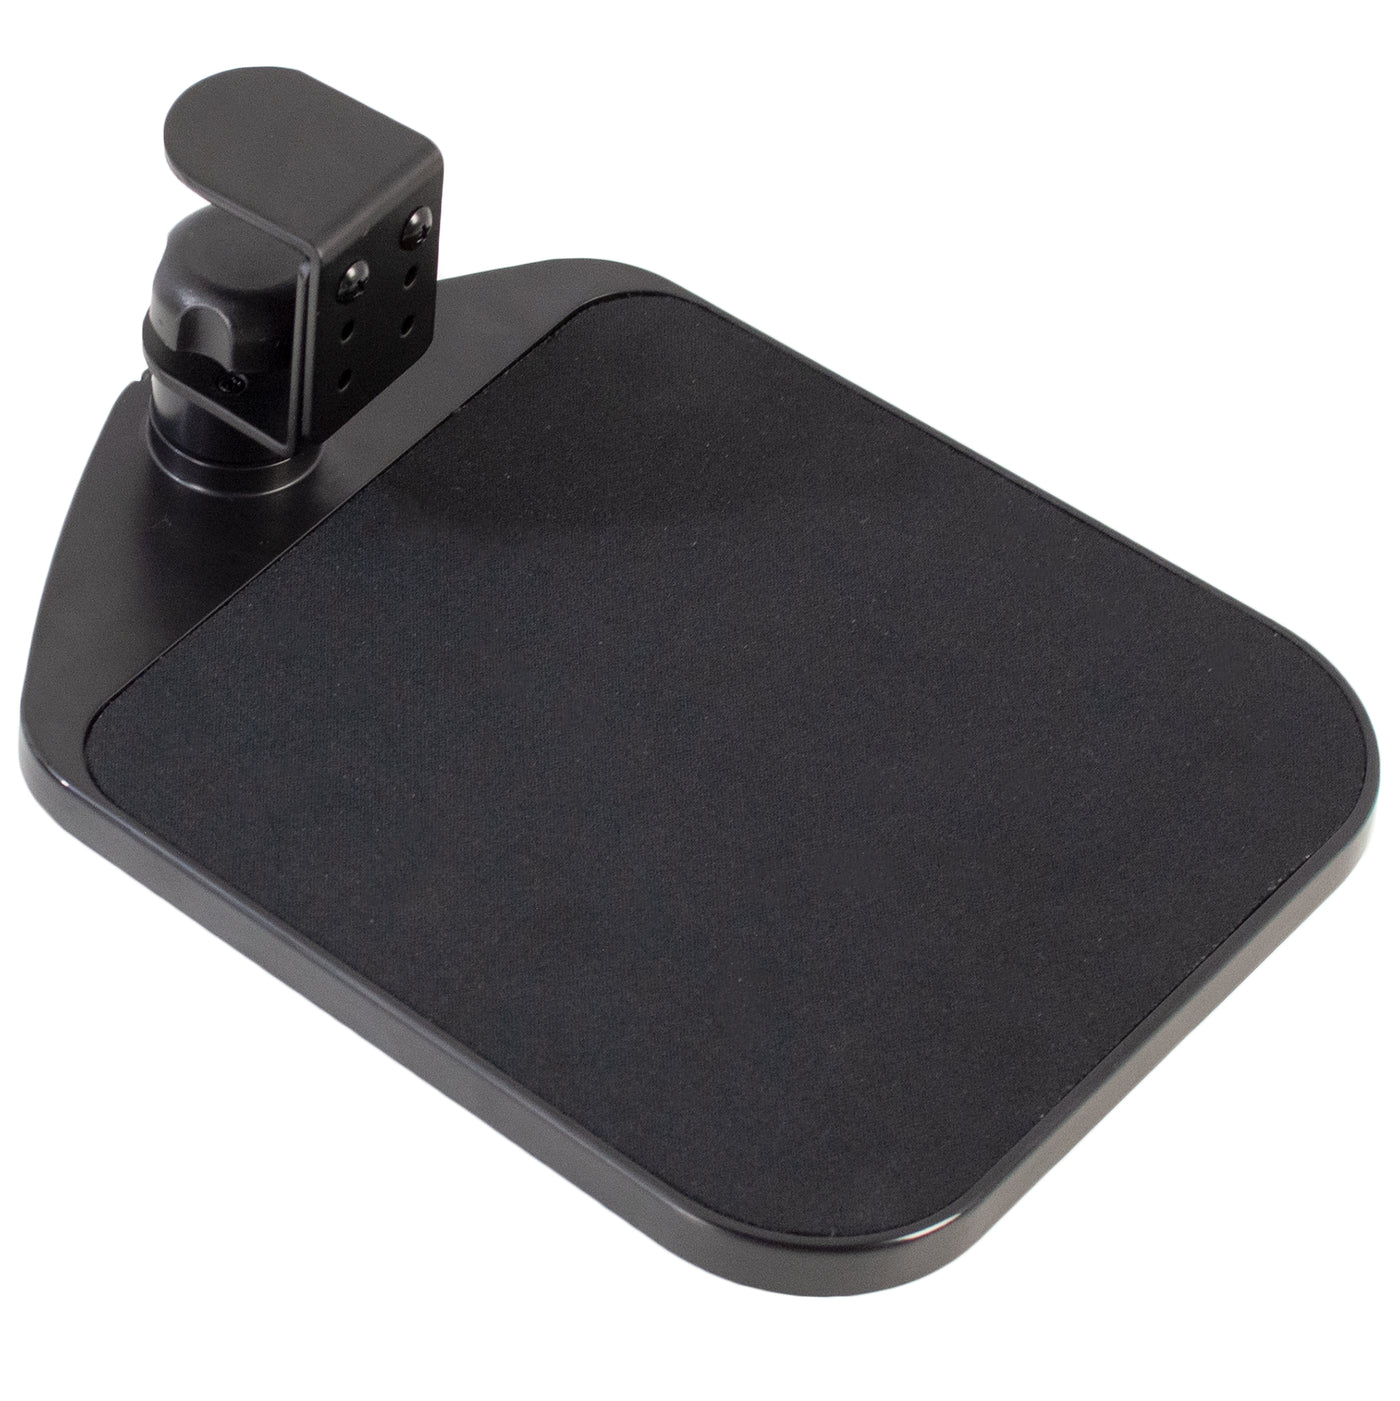 Black quick attach clamp-on mouse pad.